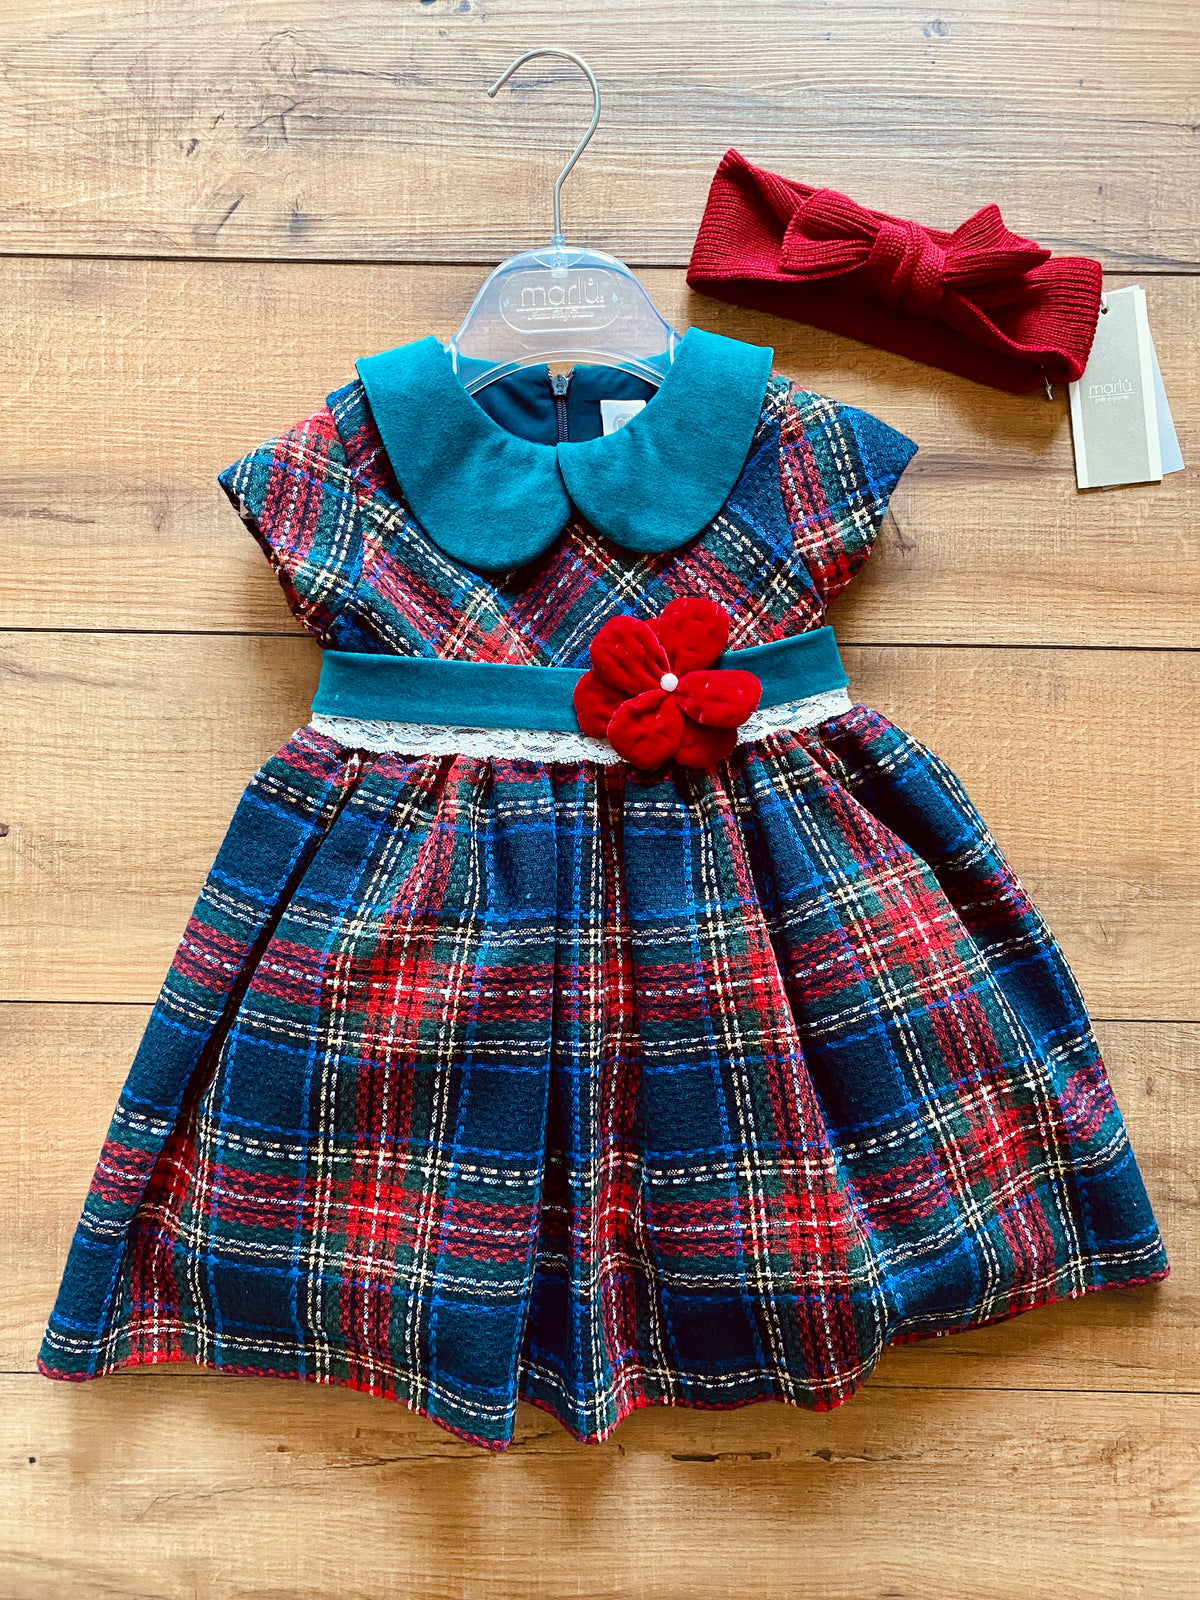 Christmas Ceremony dress for her - NEW Marlu°® winter collection